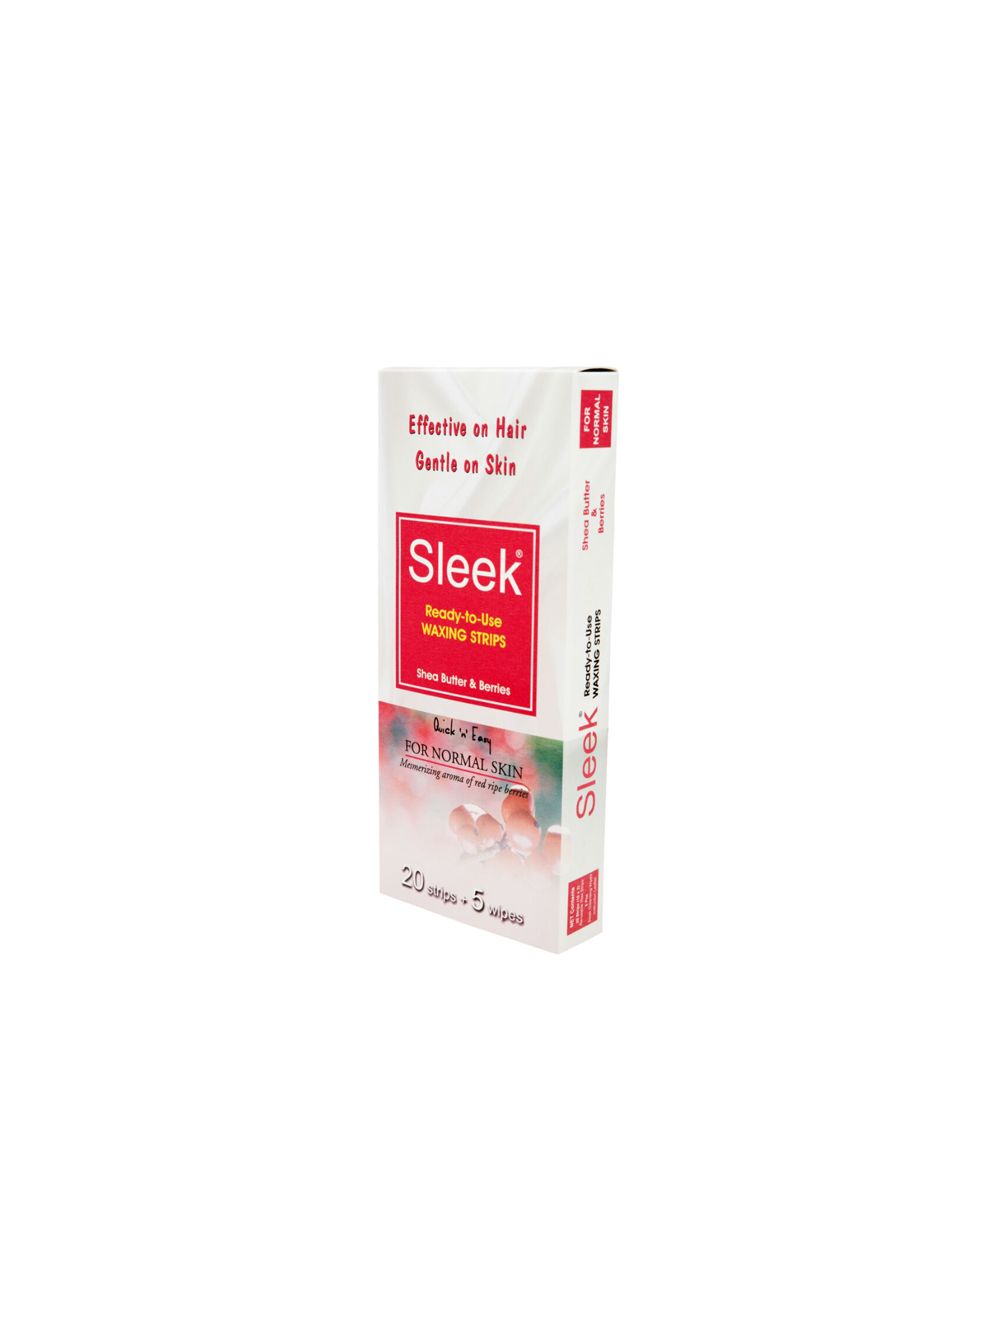 Sleek Ready to Use Waxing Strips for Normal Skin Shea Butter & Berries - 20 Strips